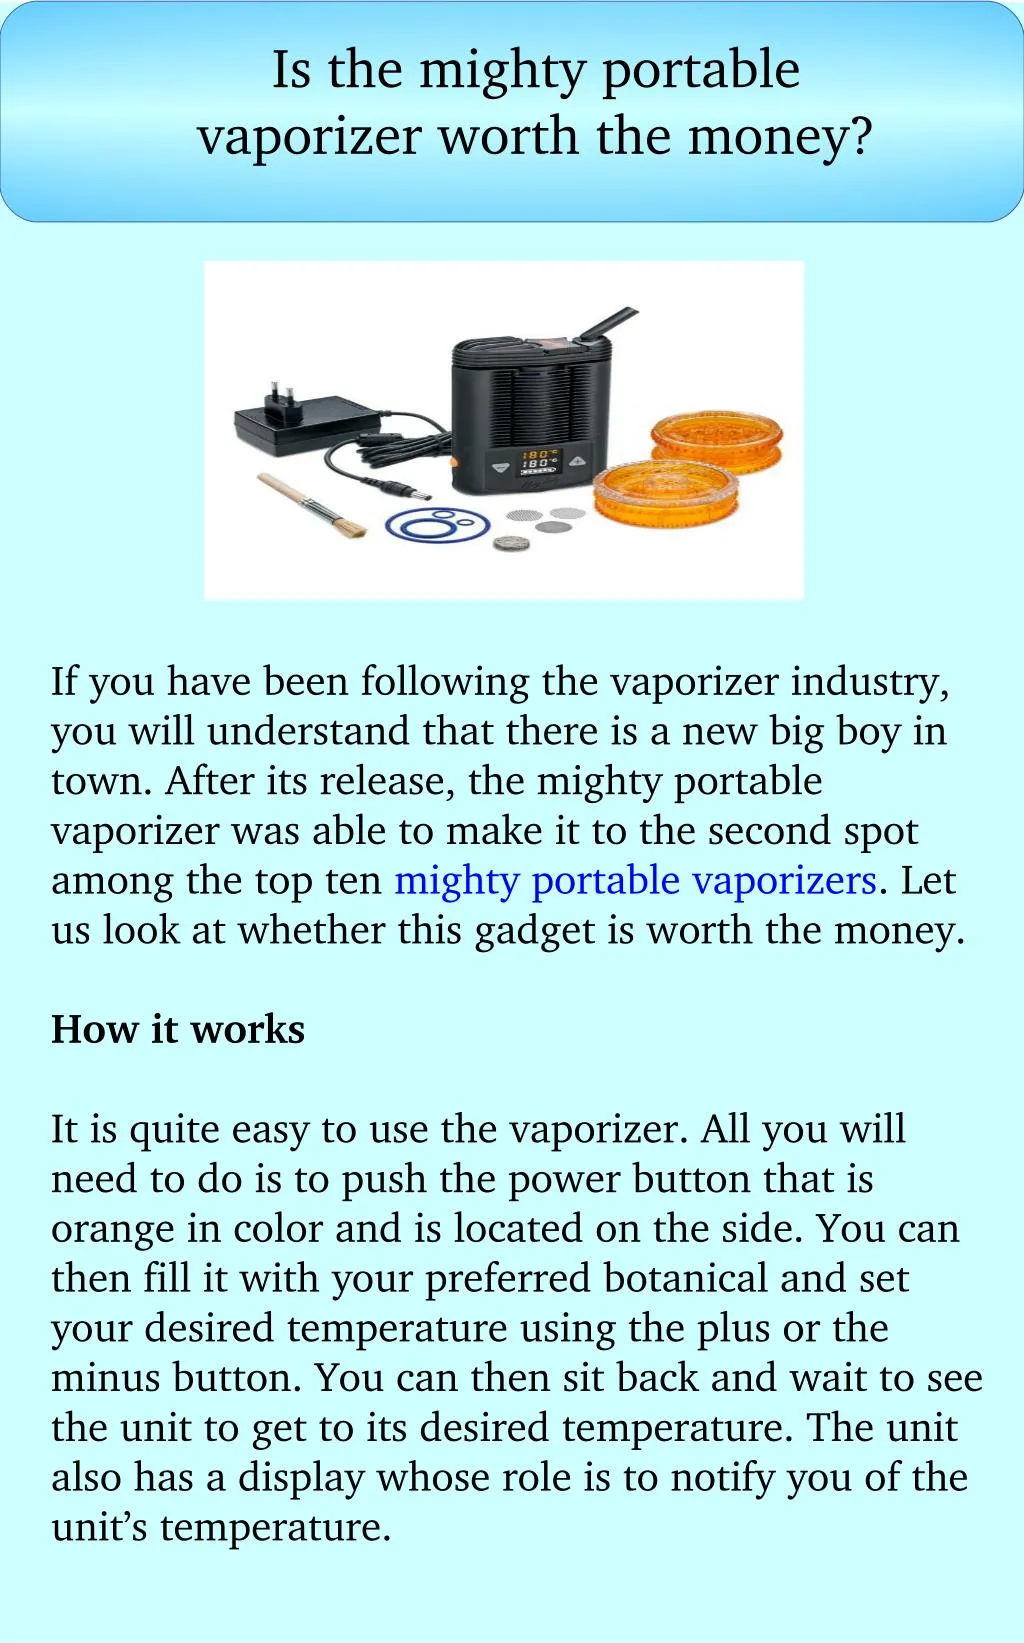 is the mighty portable vaporizer worth the money